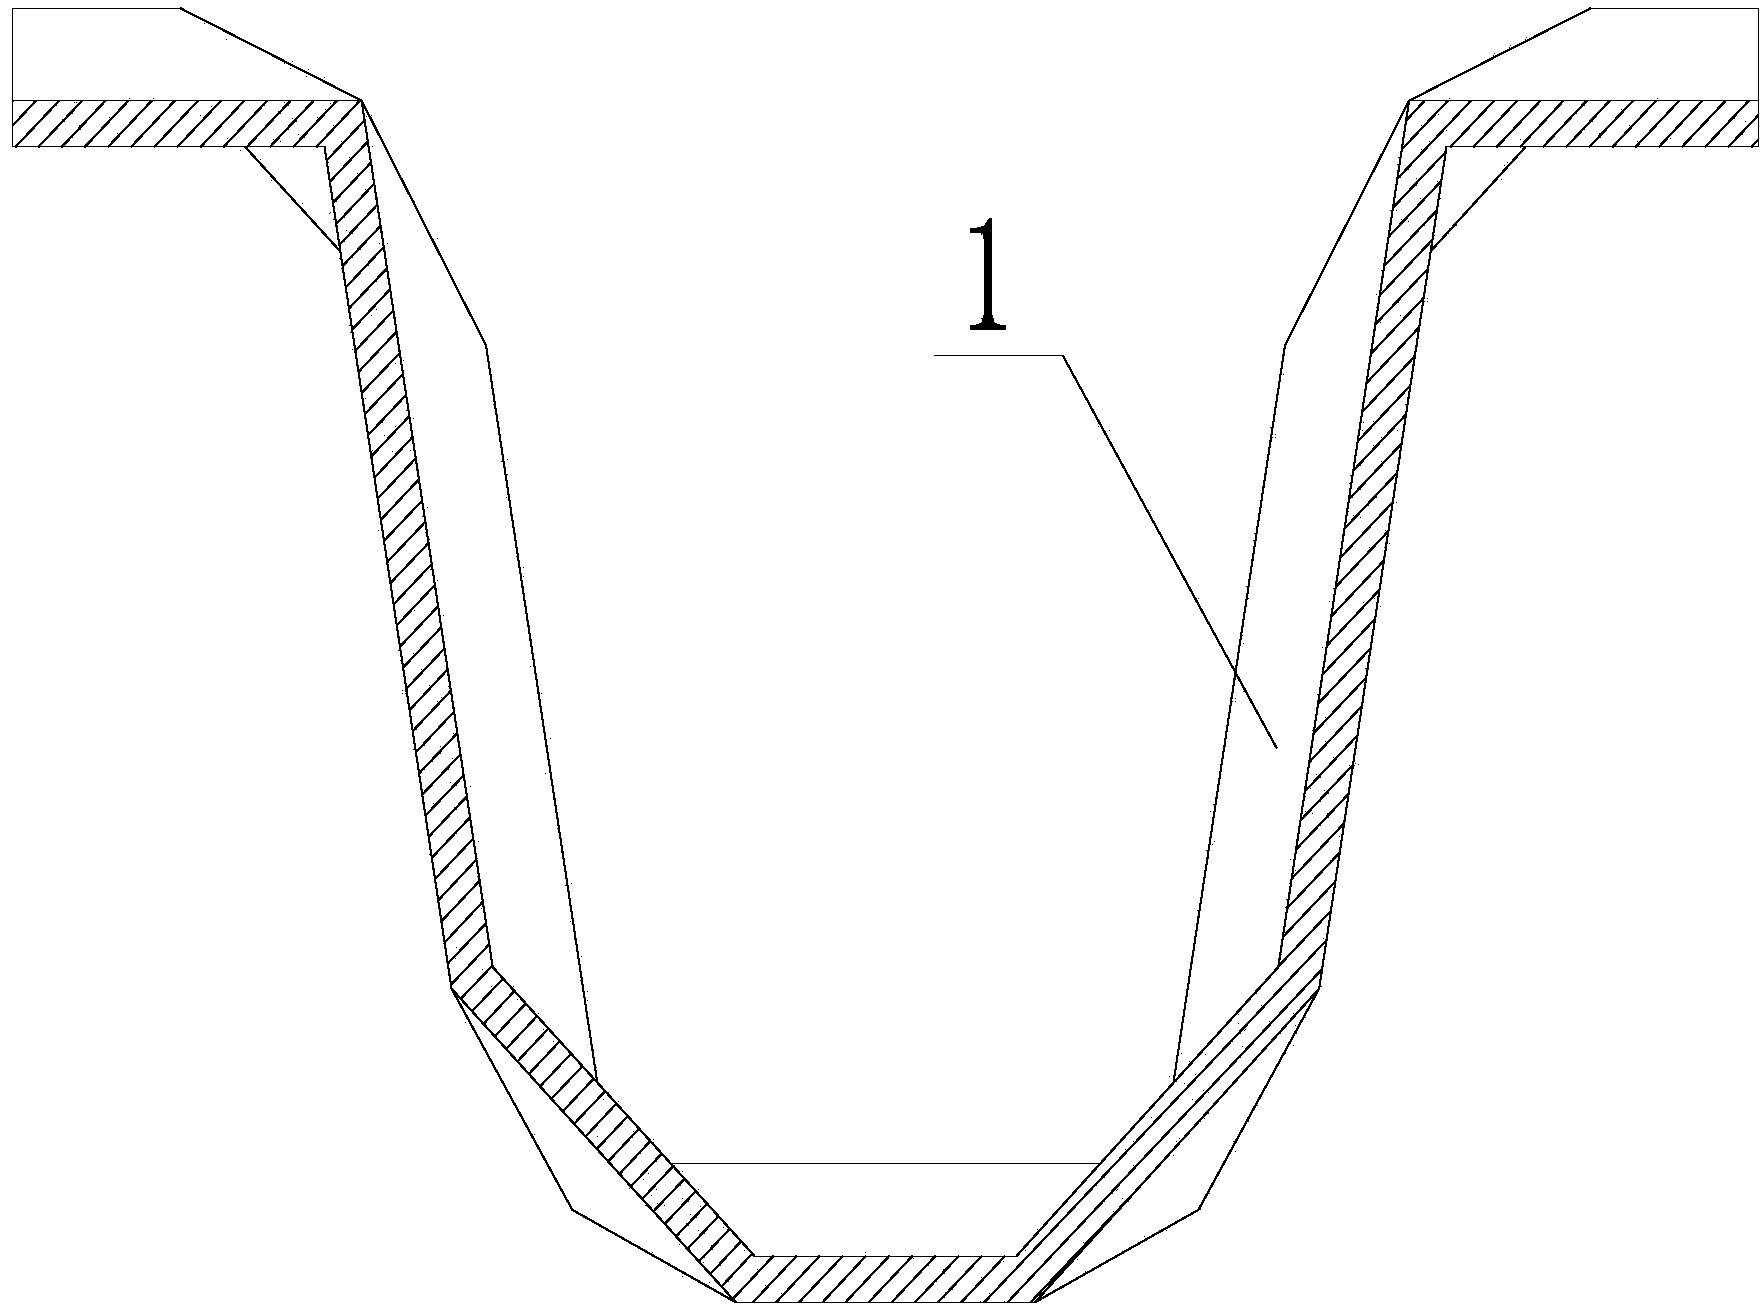 Anti-collision support with corrugated face